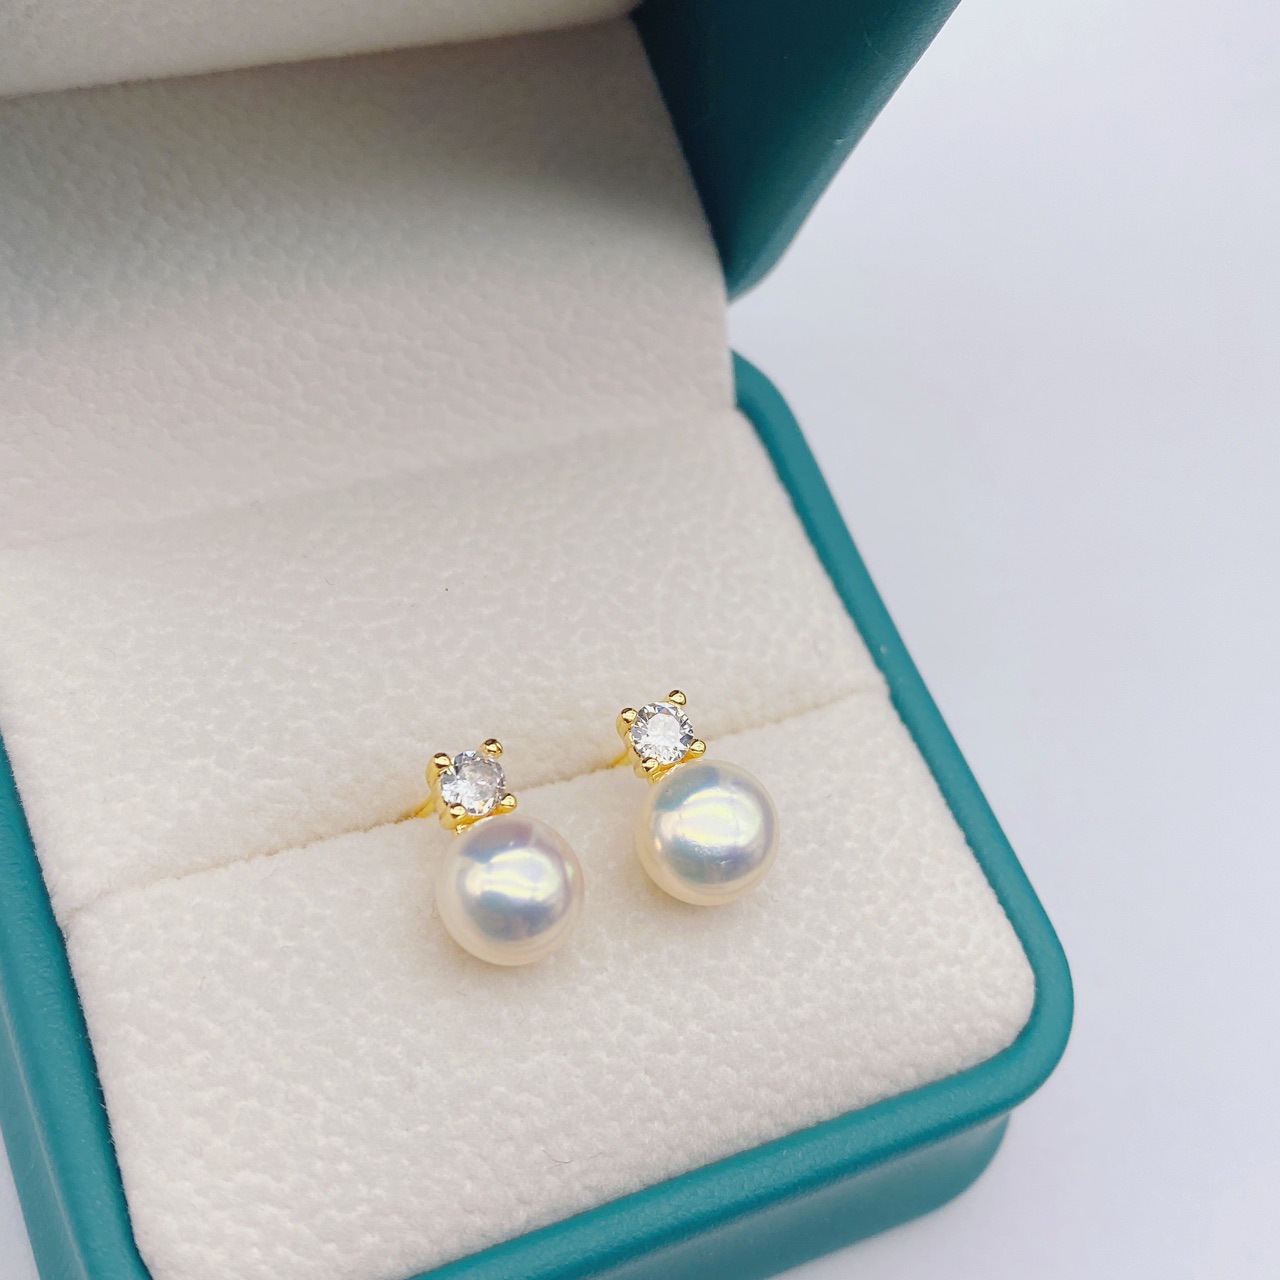 Classic Princess Style Sterling Silver Needle Stud Earrings Natural Freshwater Pearl 7-8mm Surface Basically Flawless Pearl Earrings